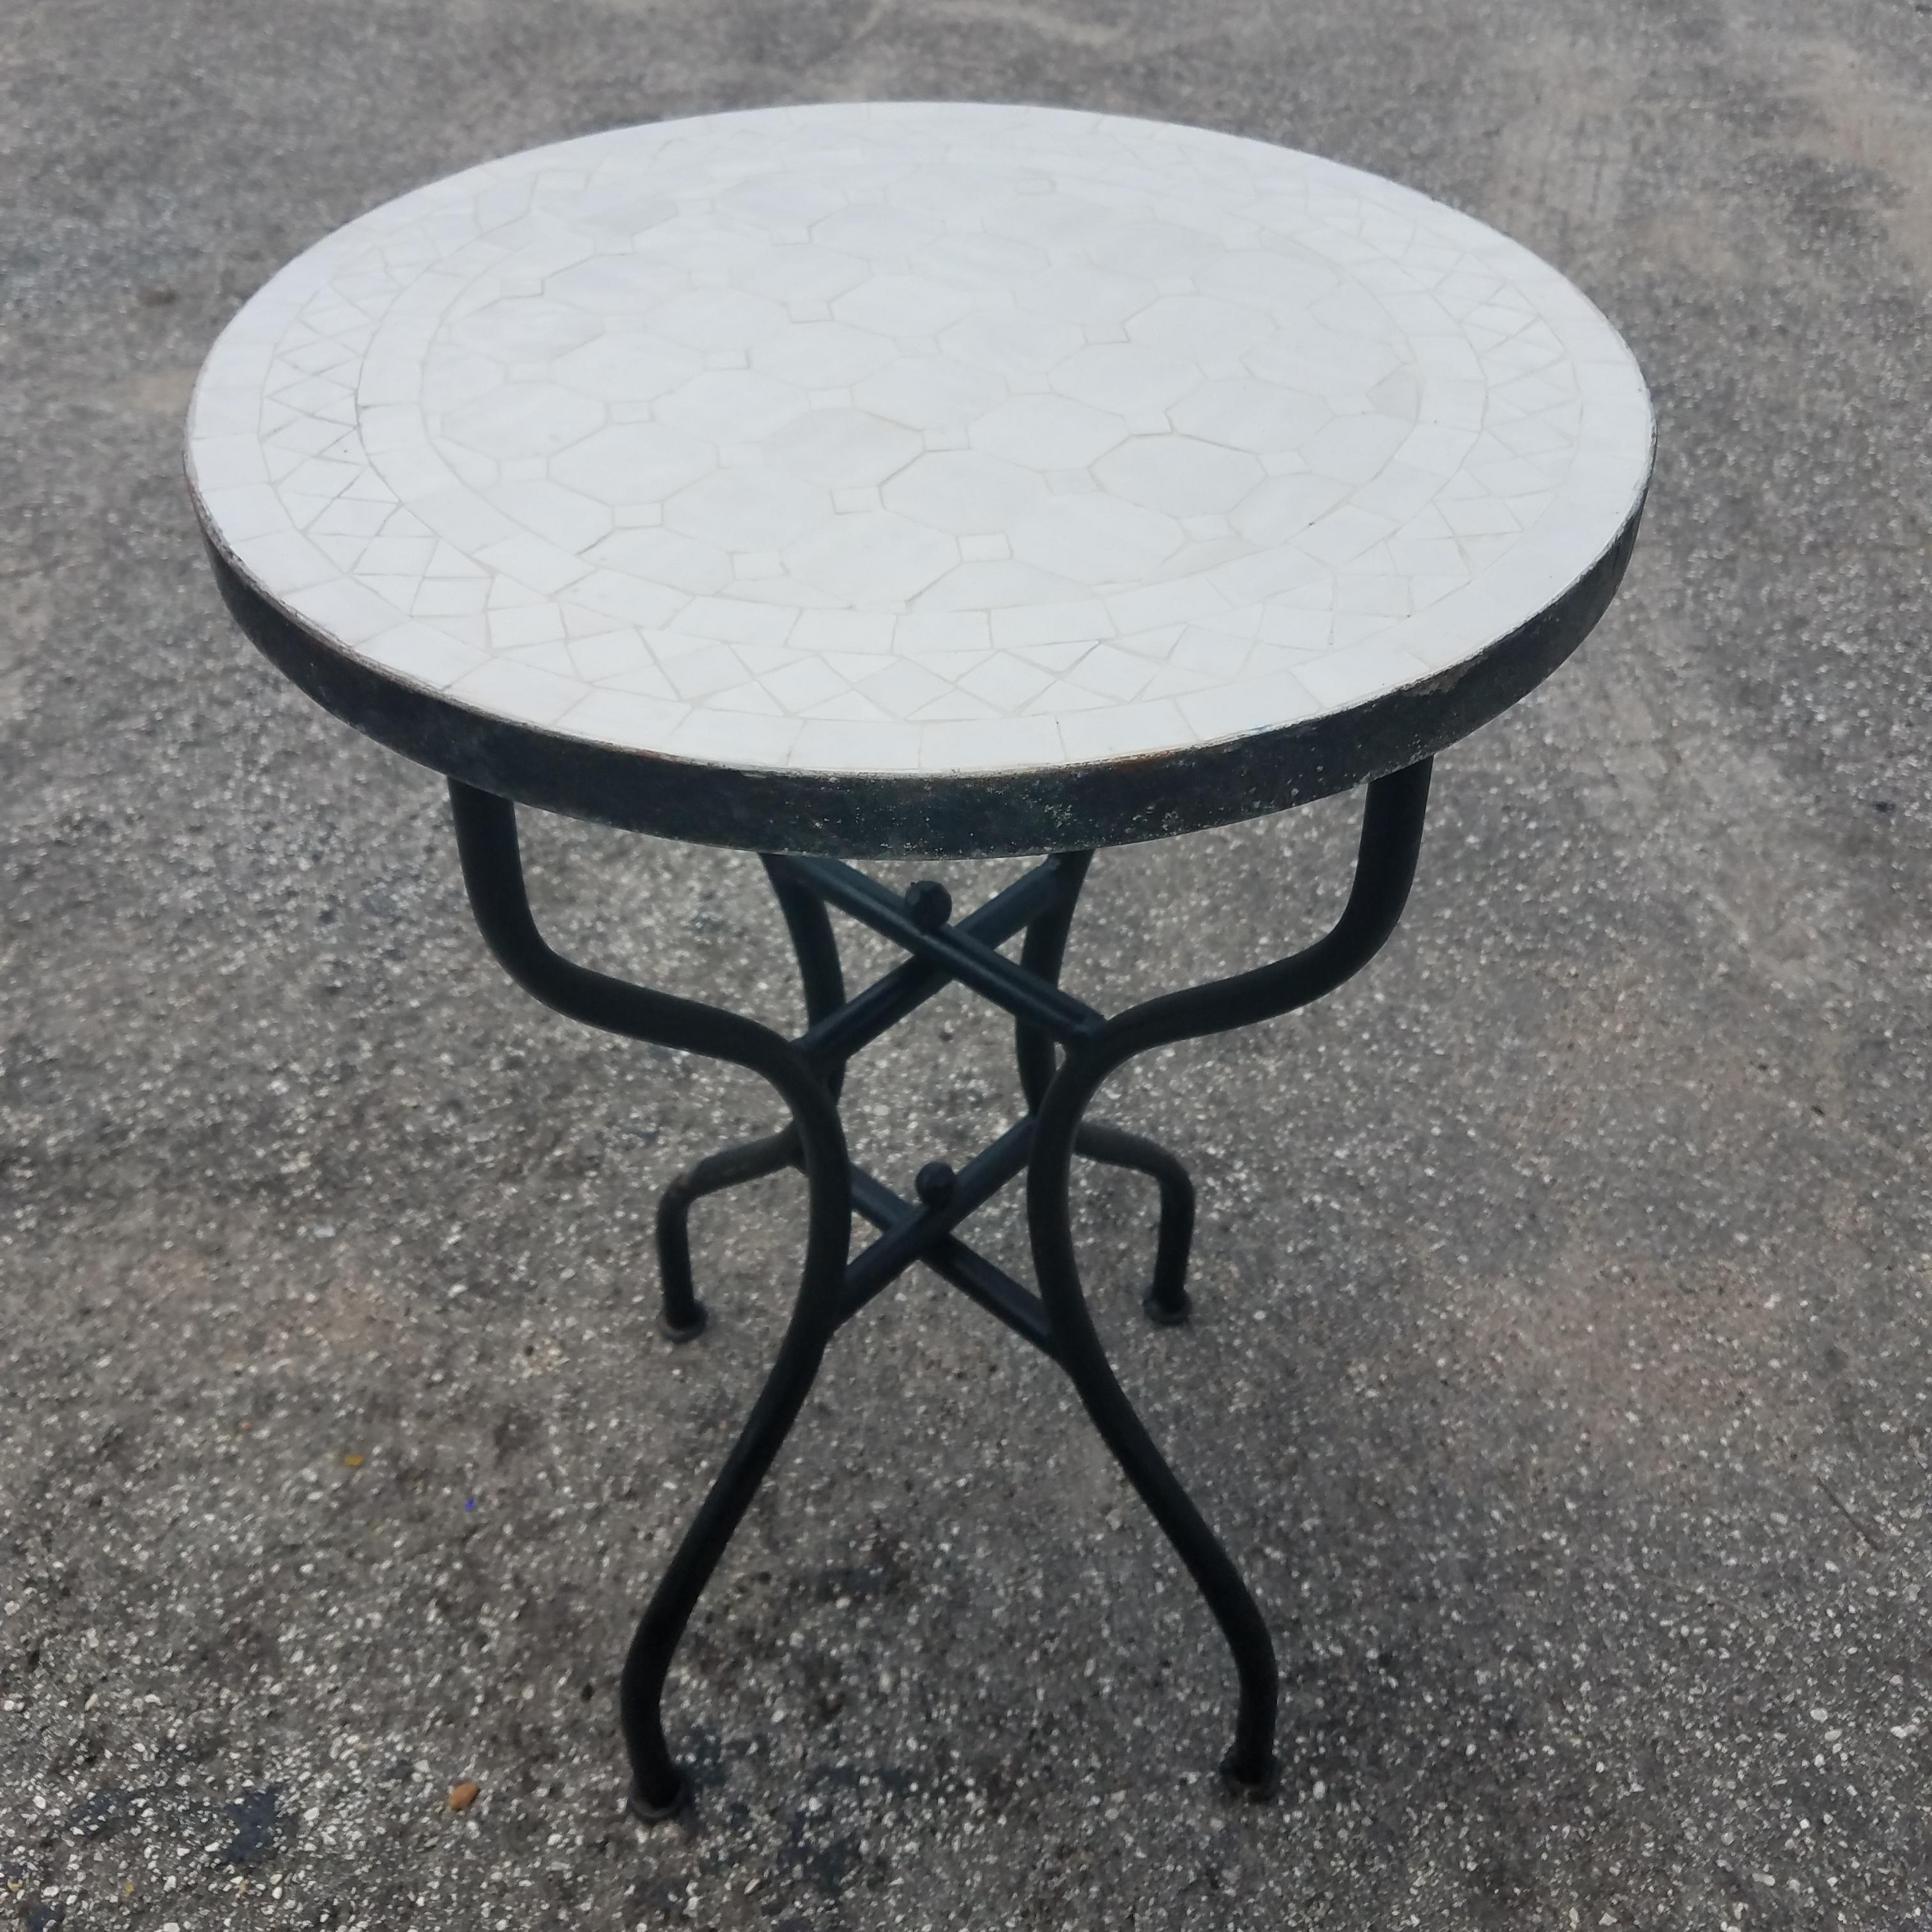 All White Moroccan Mosaic Side Table, CR4 In Excellent Condition For Sale In Orlando, FL